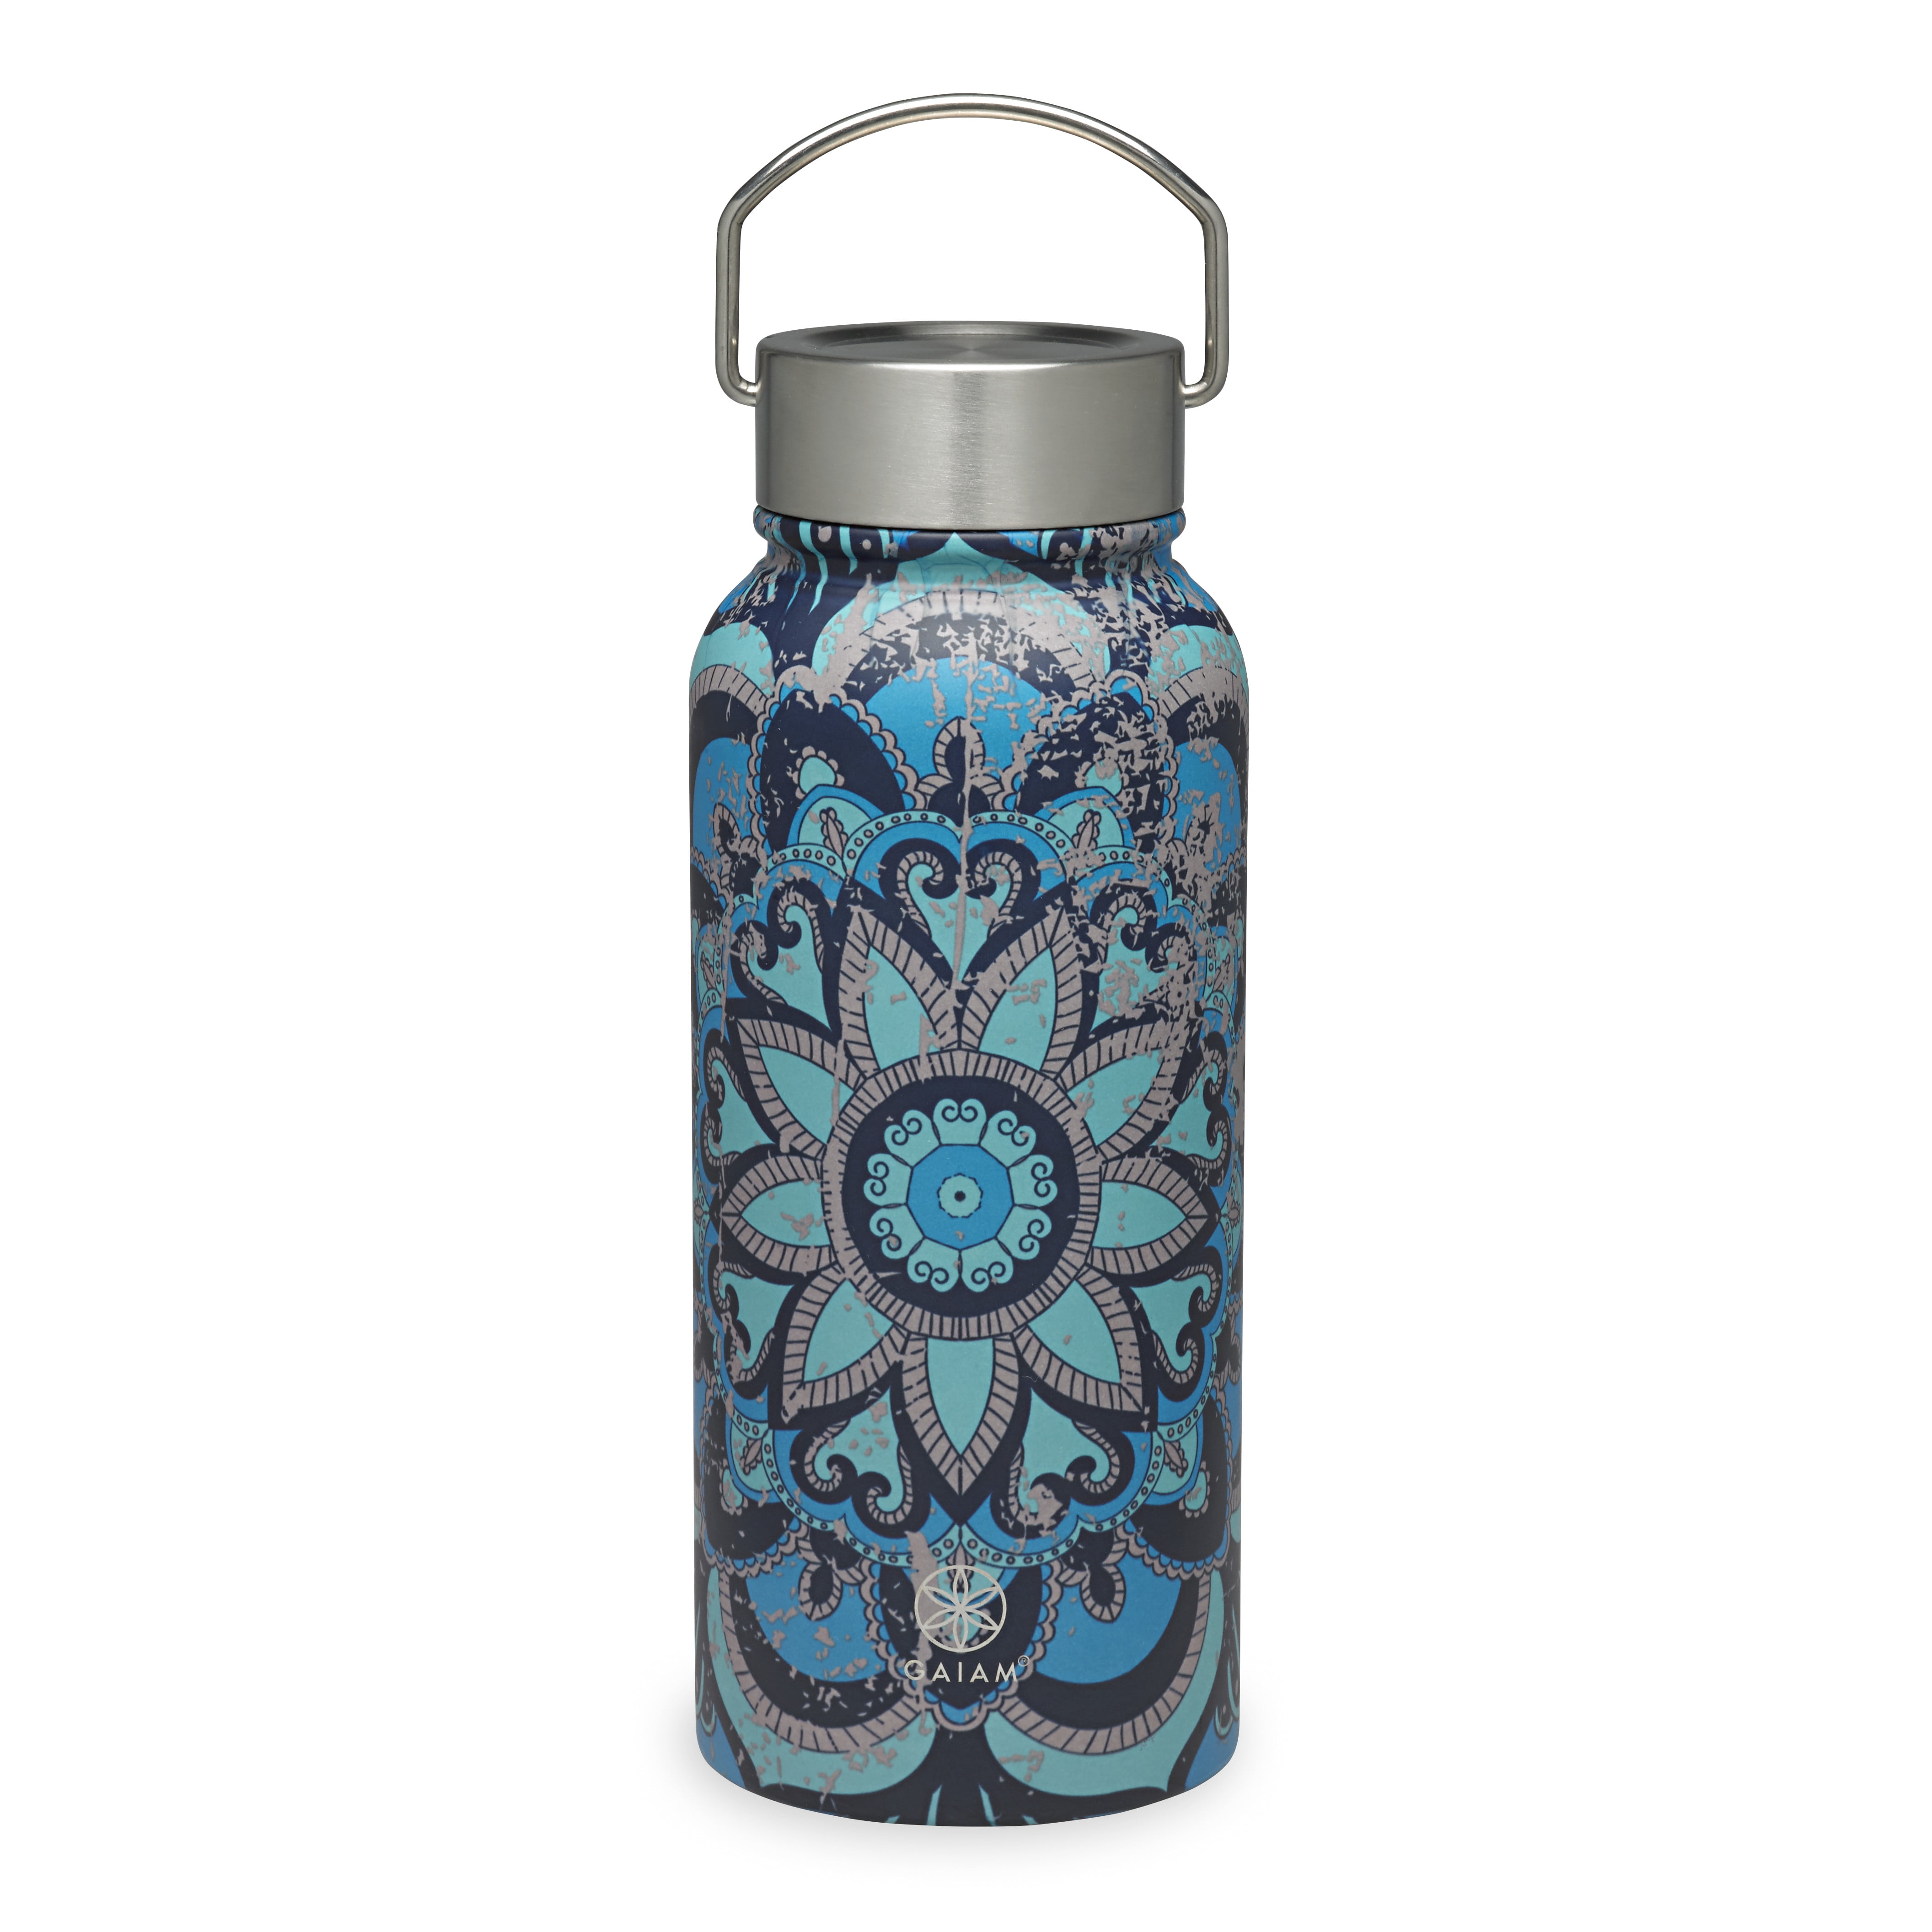 Gaiam Stainless Steel Wide Mouth Water Bottle 32oz Madeira - Walmart Gaiam Water Bottle Stainless Steel